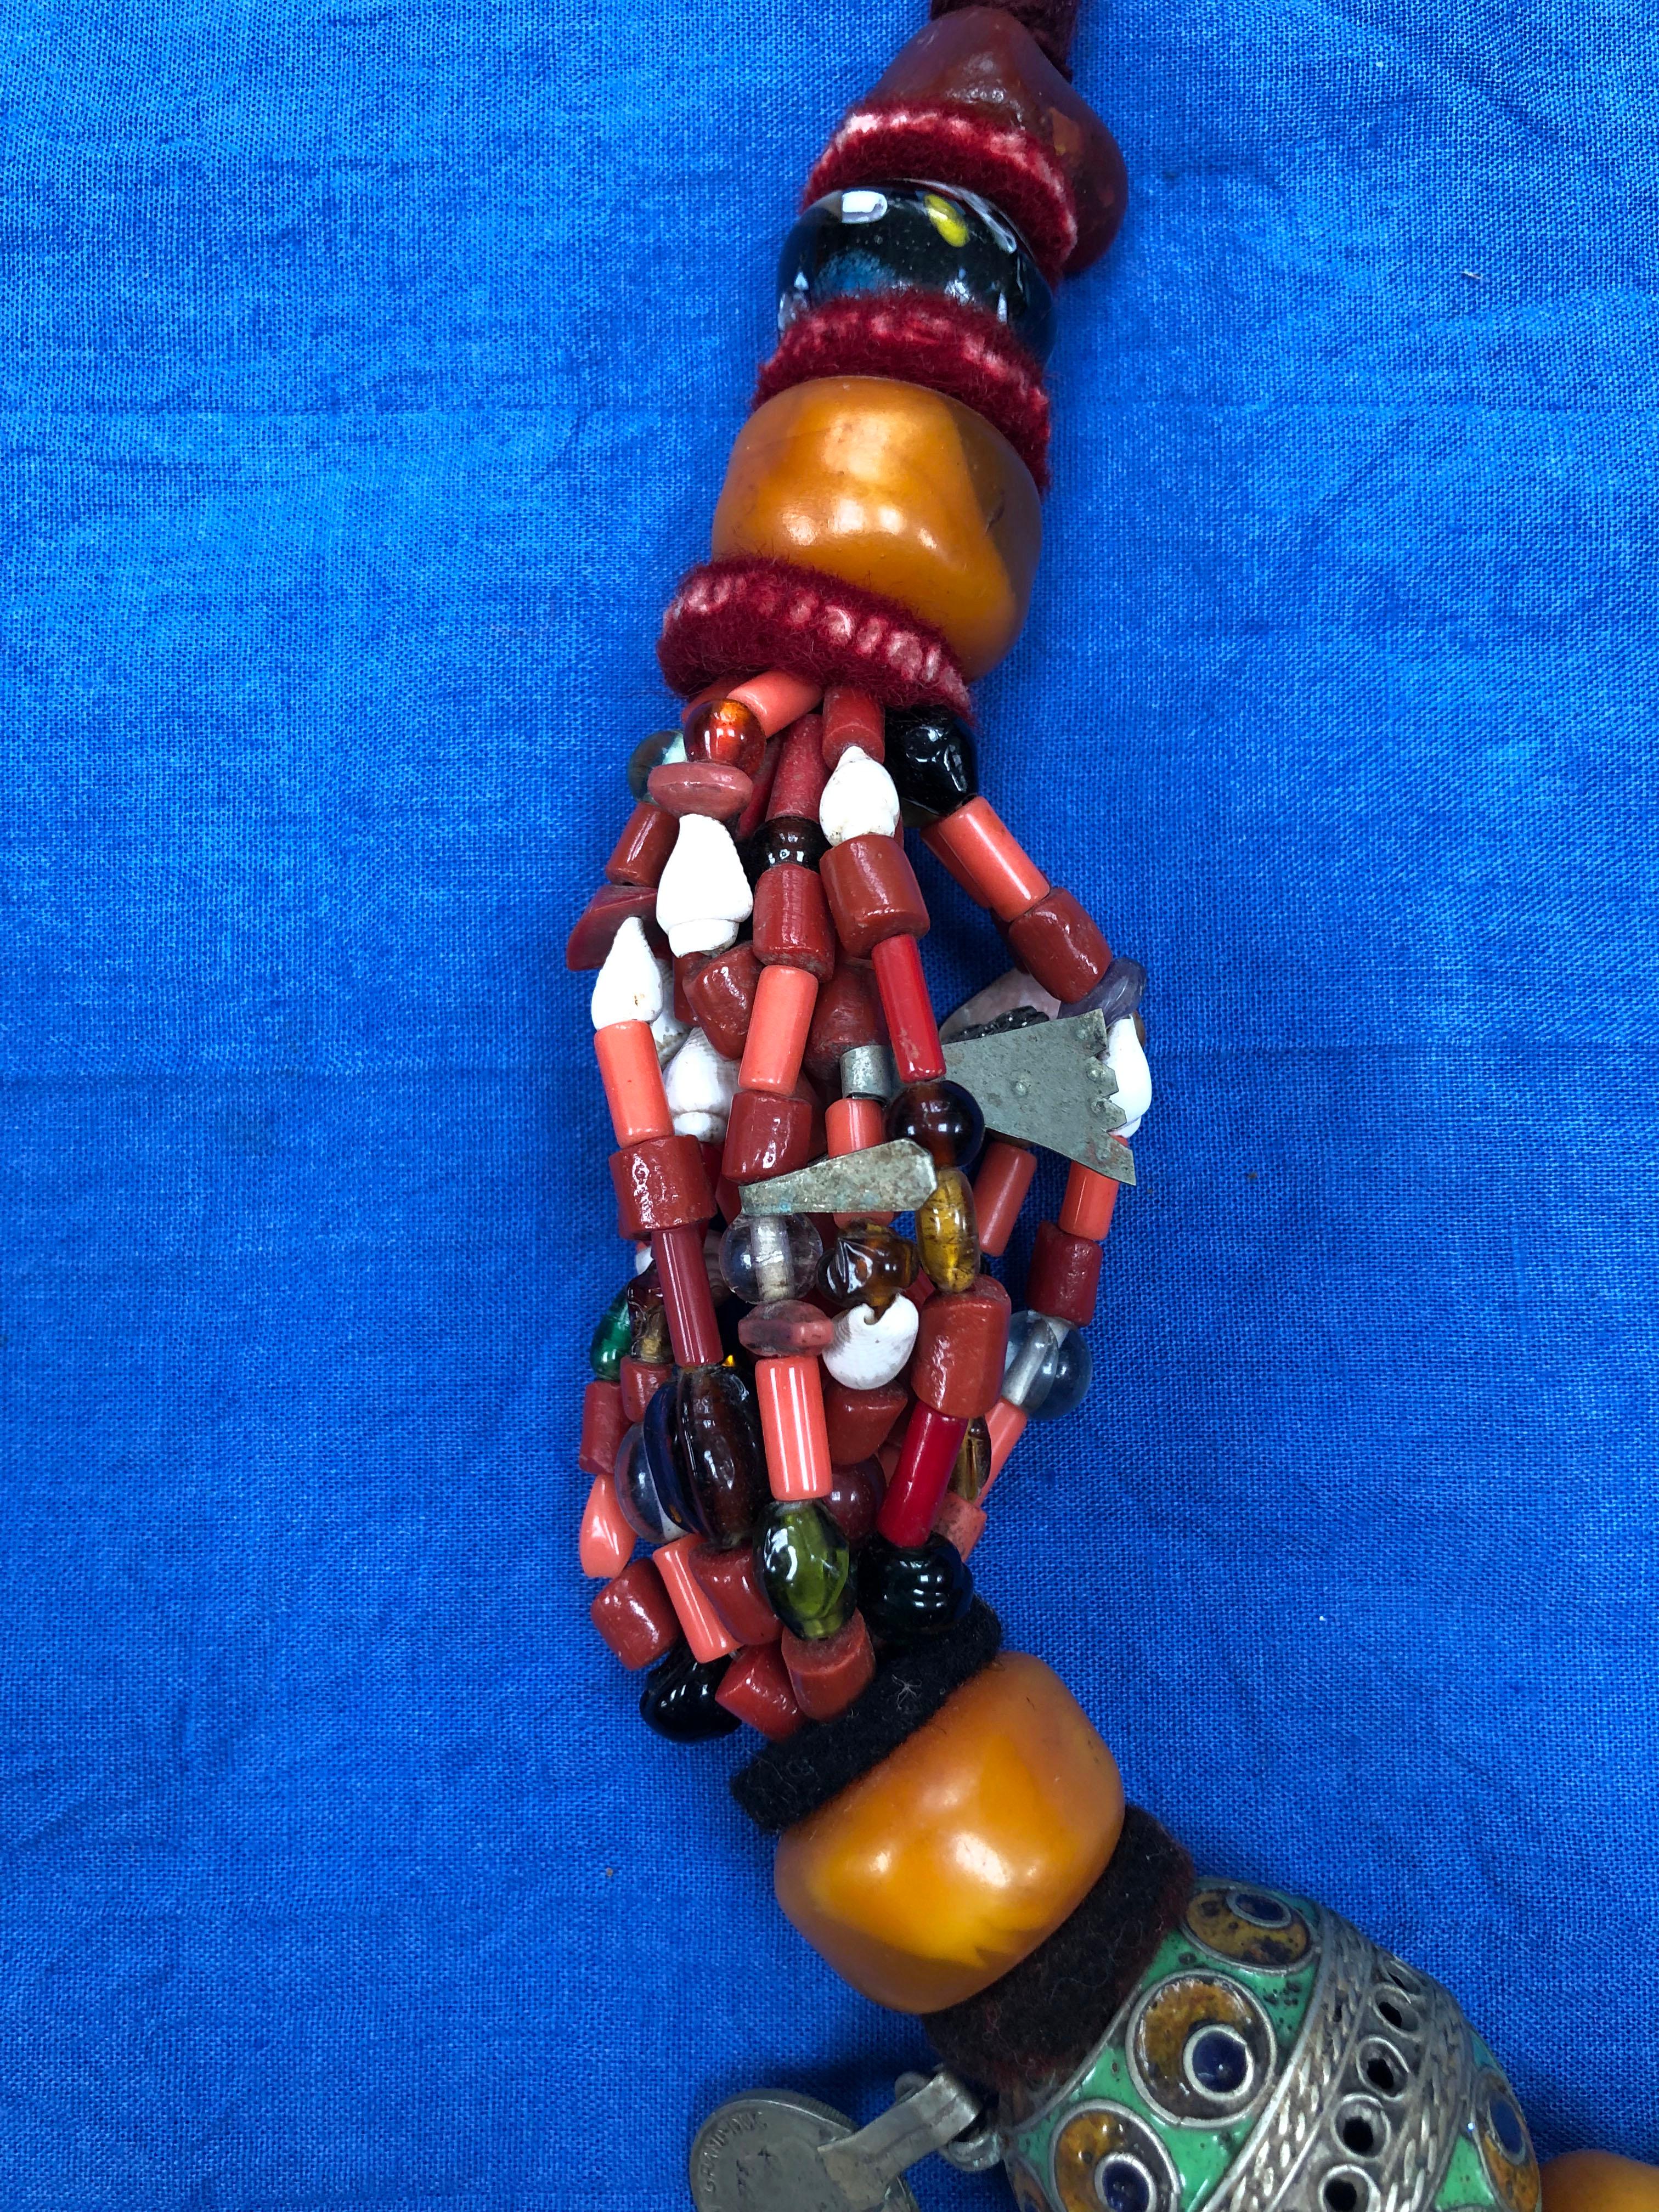 Large Moroccan Berber Boho Bead Necklace: Silver, Enamel, Amber, Copal, Coin In Good Condition For Sale In Vineyard Haven, MA